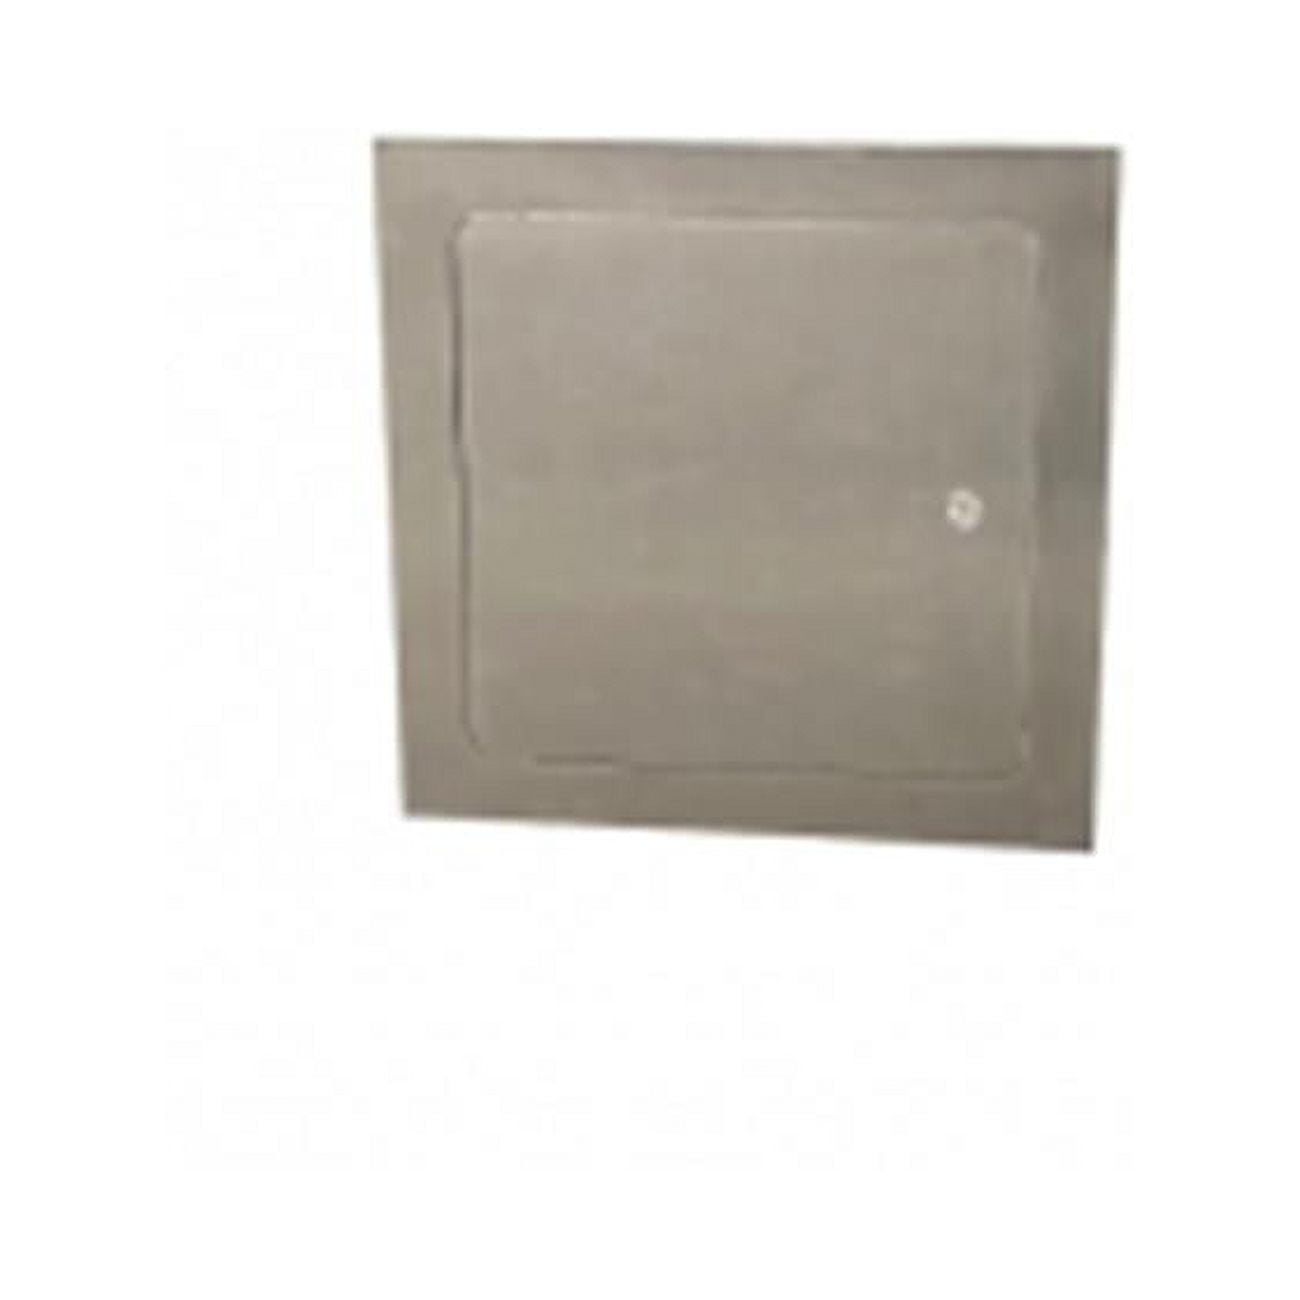 Products Rad88 8 X 8 In. Stainless Steel Recessed Access Door